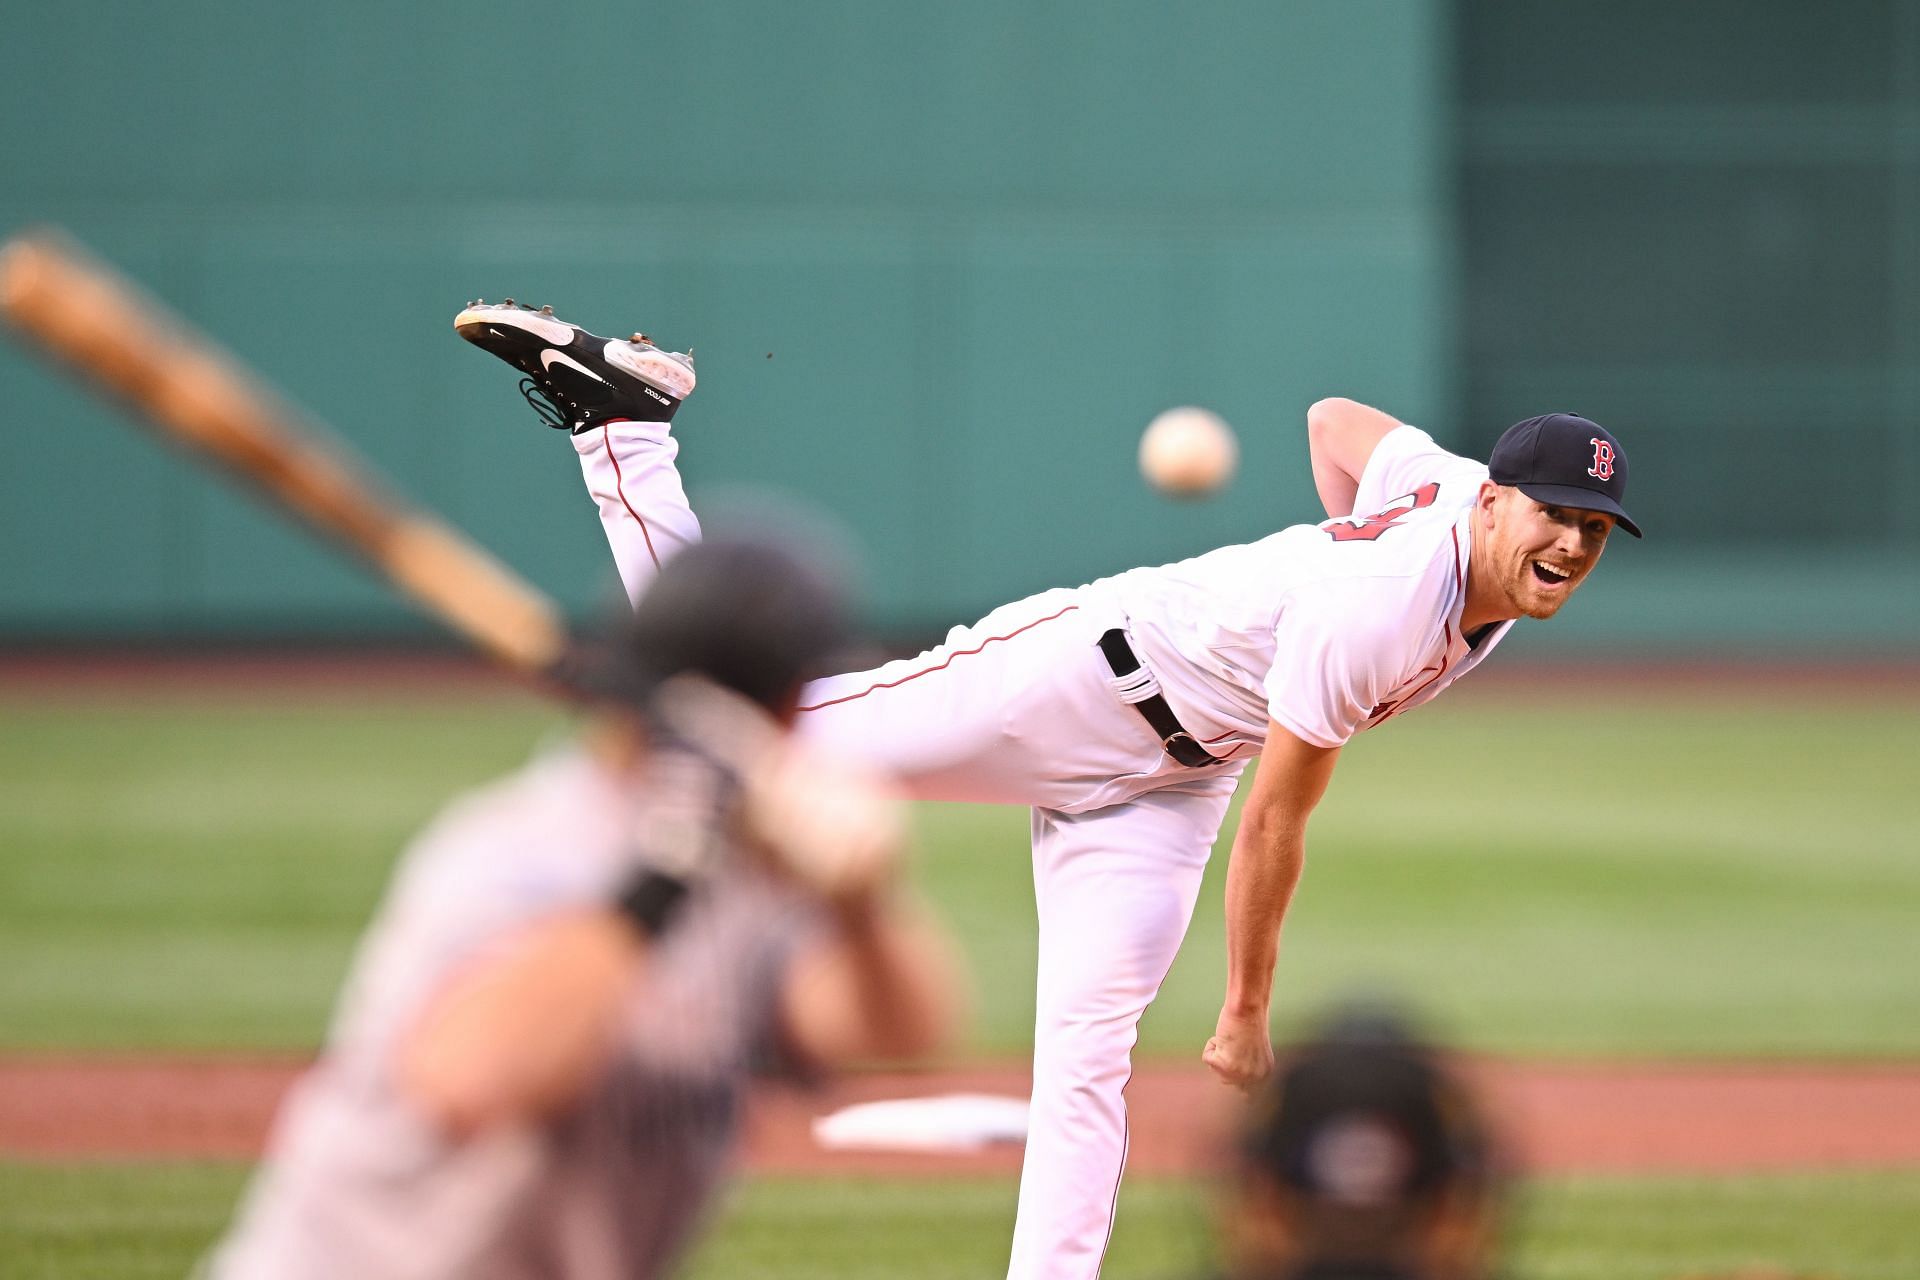 Nick Pivetta pitches during a New York Yankees v Boston Red Sox game at Fenway Park.